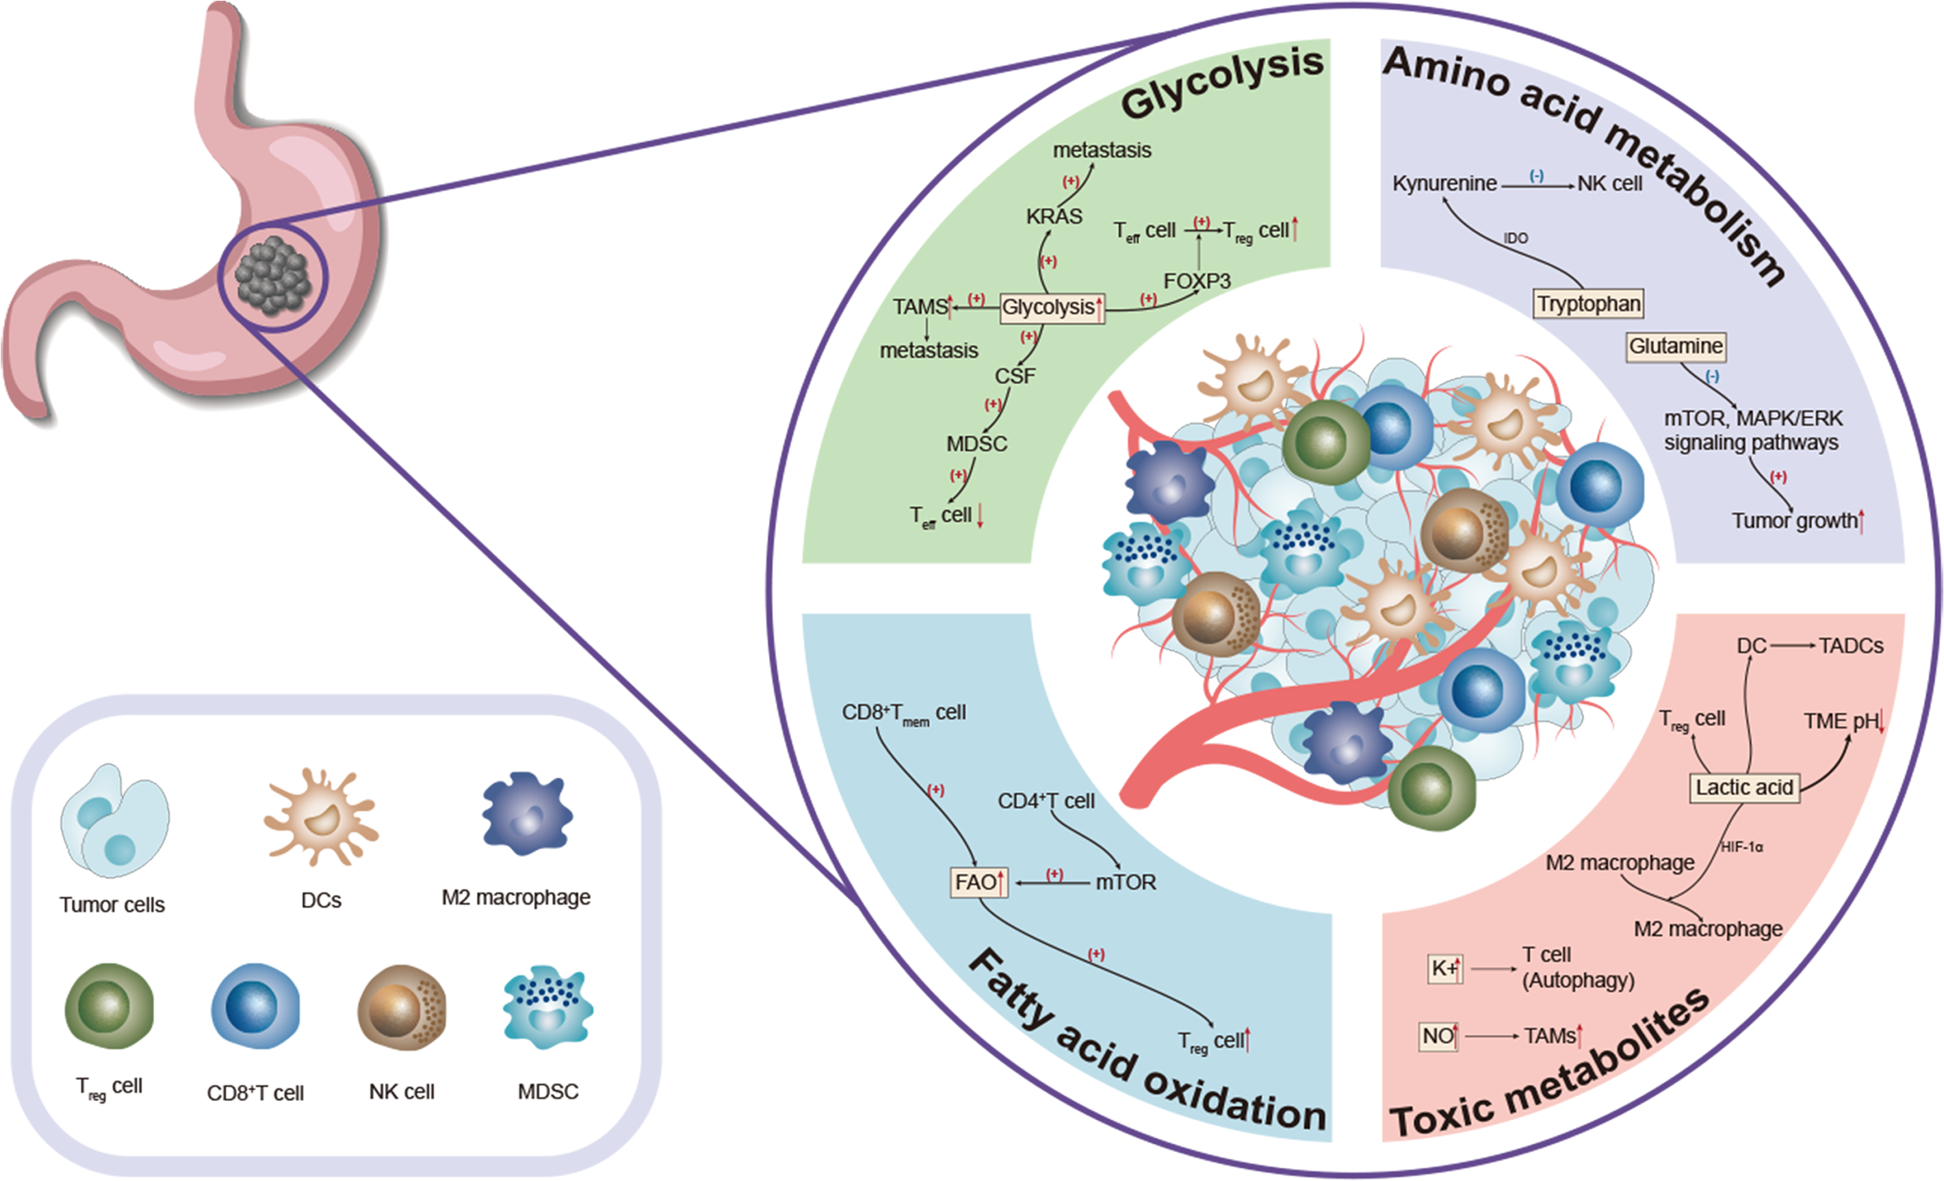 Impacts and mechanisms of metabolic reprogramming of tumor